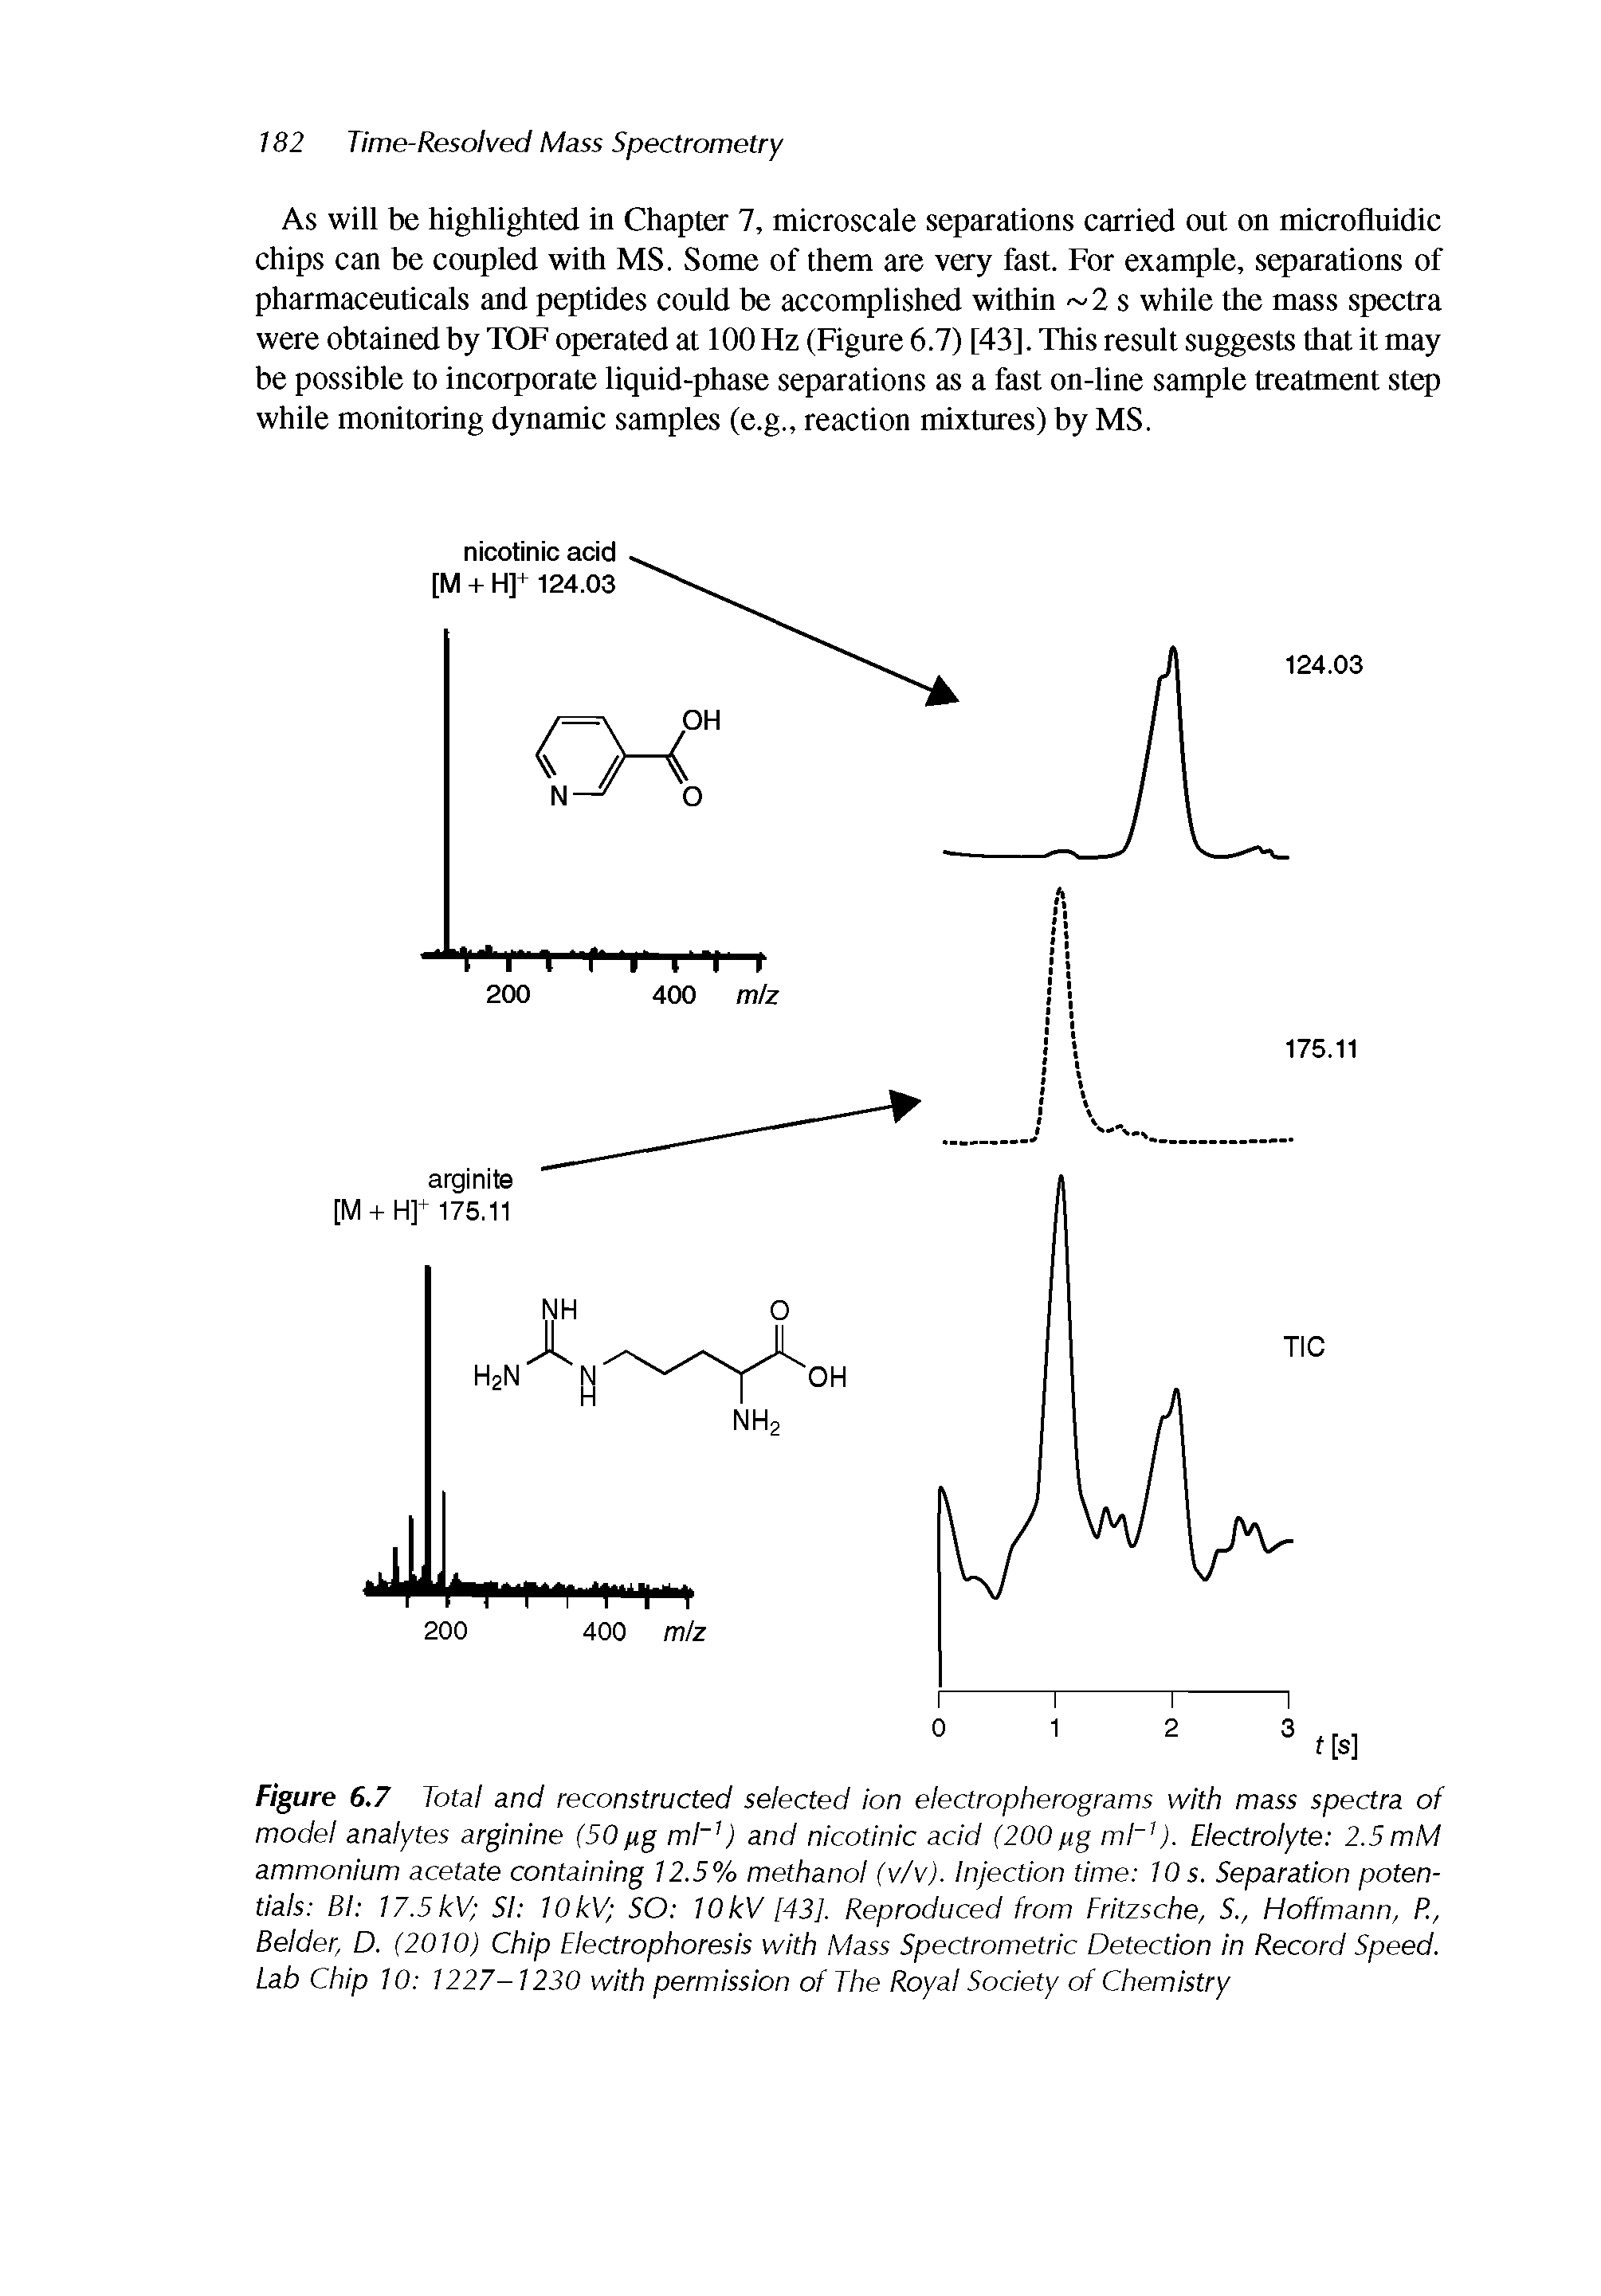 Figure 6.7 Total and reconstructed selected ion electropherograms with mass spectra of model analytes arginine (50 fig ml ) and nicotinic acid (200 fig ml ). Electrolyte 2.5mM ammonium acetate containing 12.5% methanol (v/v). Injection time 10 s. Separation potentials Bl 17.5 kV SI lOkV SO lOkV [43]. Reproduced from Fritzsche, S., Hoffmann, R, Beider, D. (2010) Chip Electrophoresis with Mass Spectrometric Detection in Record Speed. Lab Chip 10 1227-1230 with permission of The Royal Society of Chemistry...